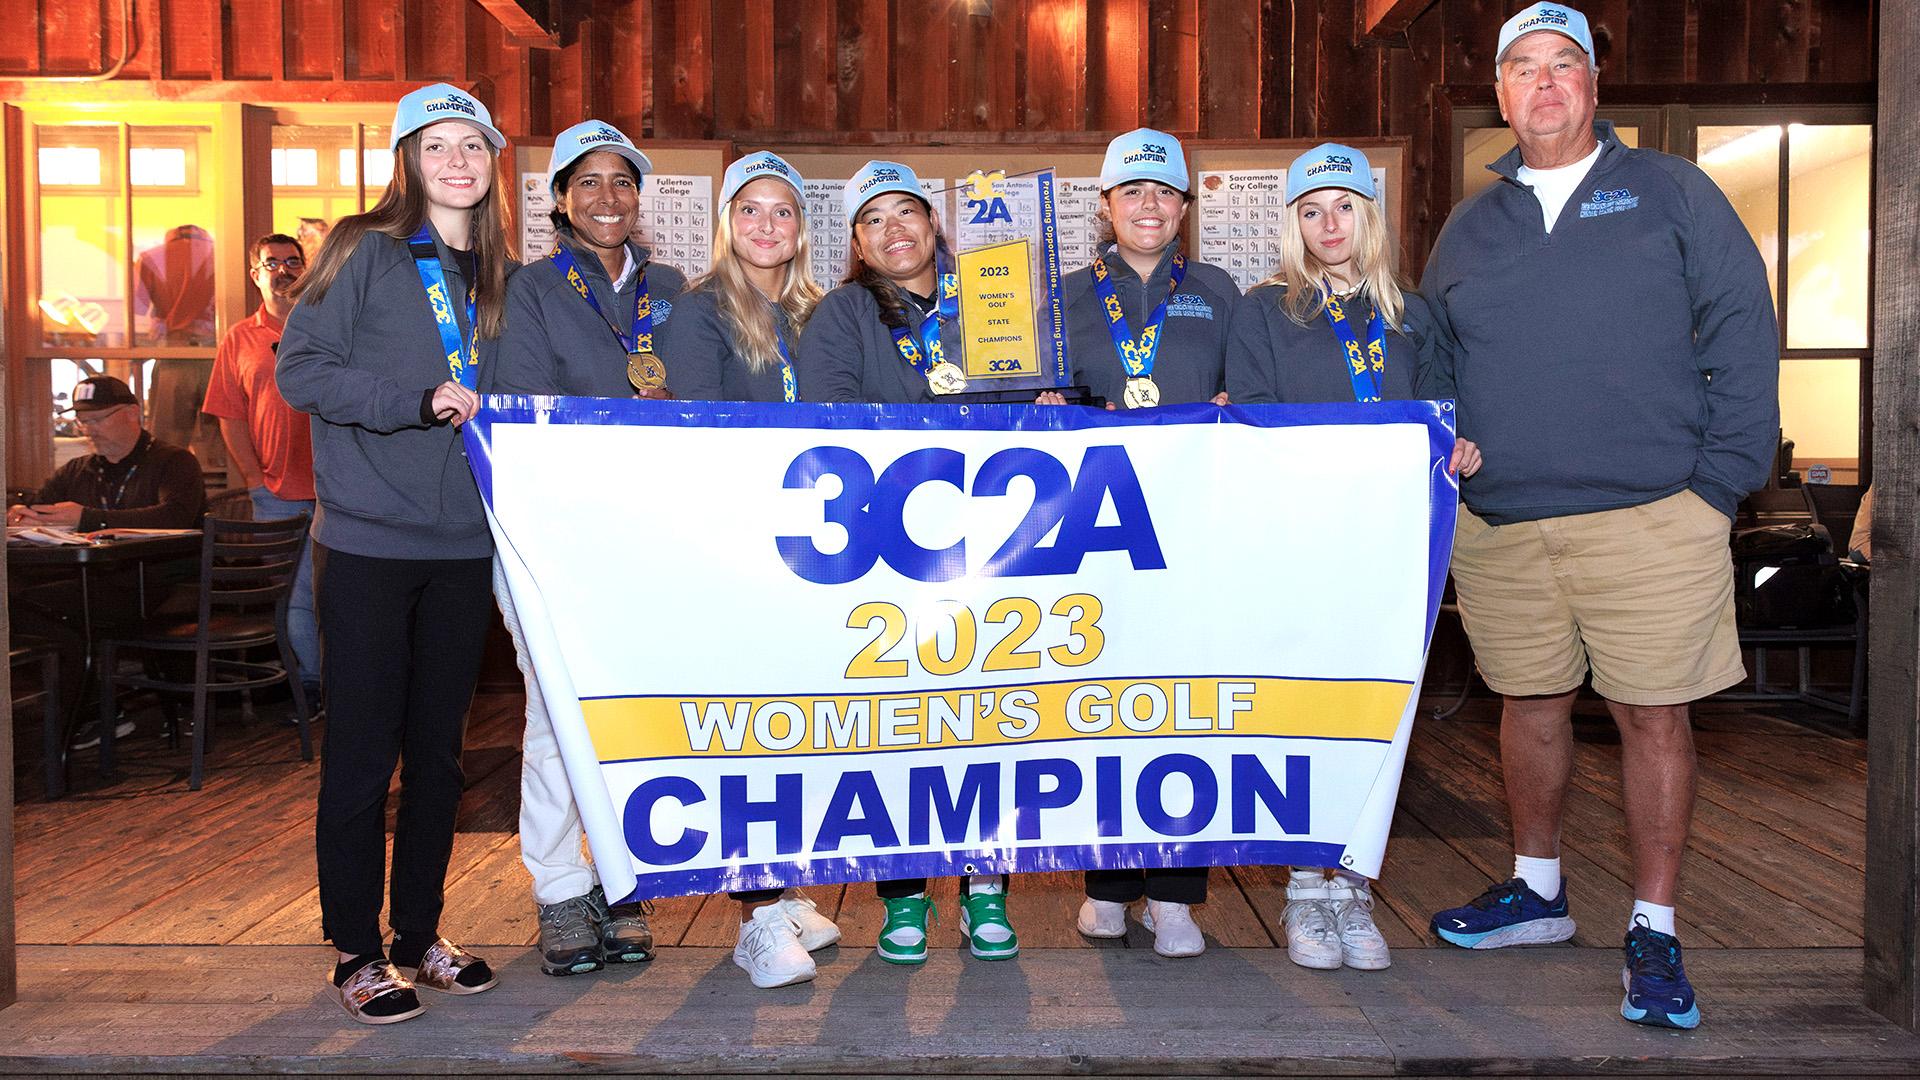 Women's Golf: Canyons Captures 2023 3C2A State Title